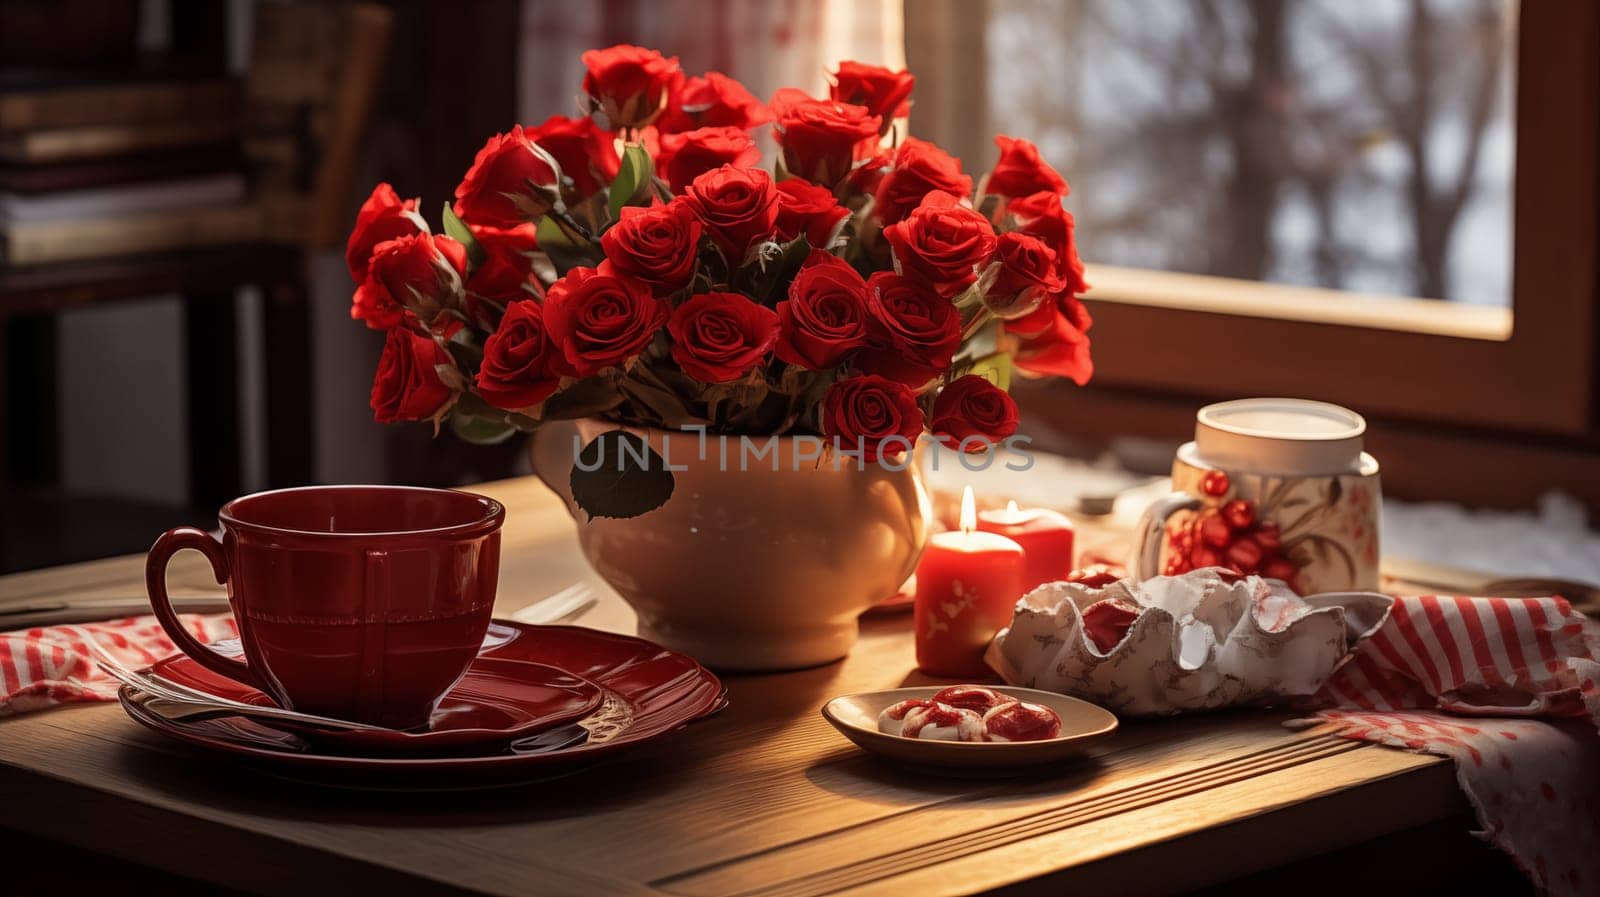 dining table with a cup, lighted candles, red roses in a ceramic vase.